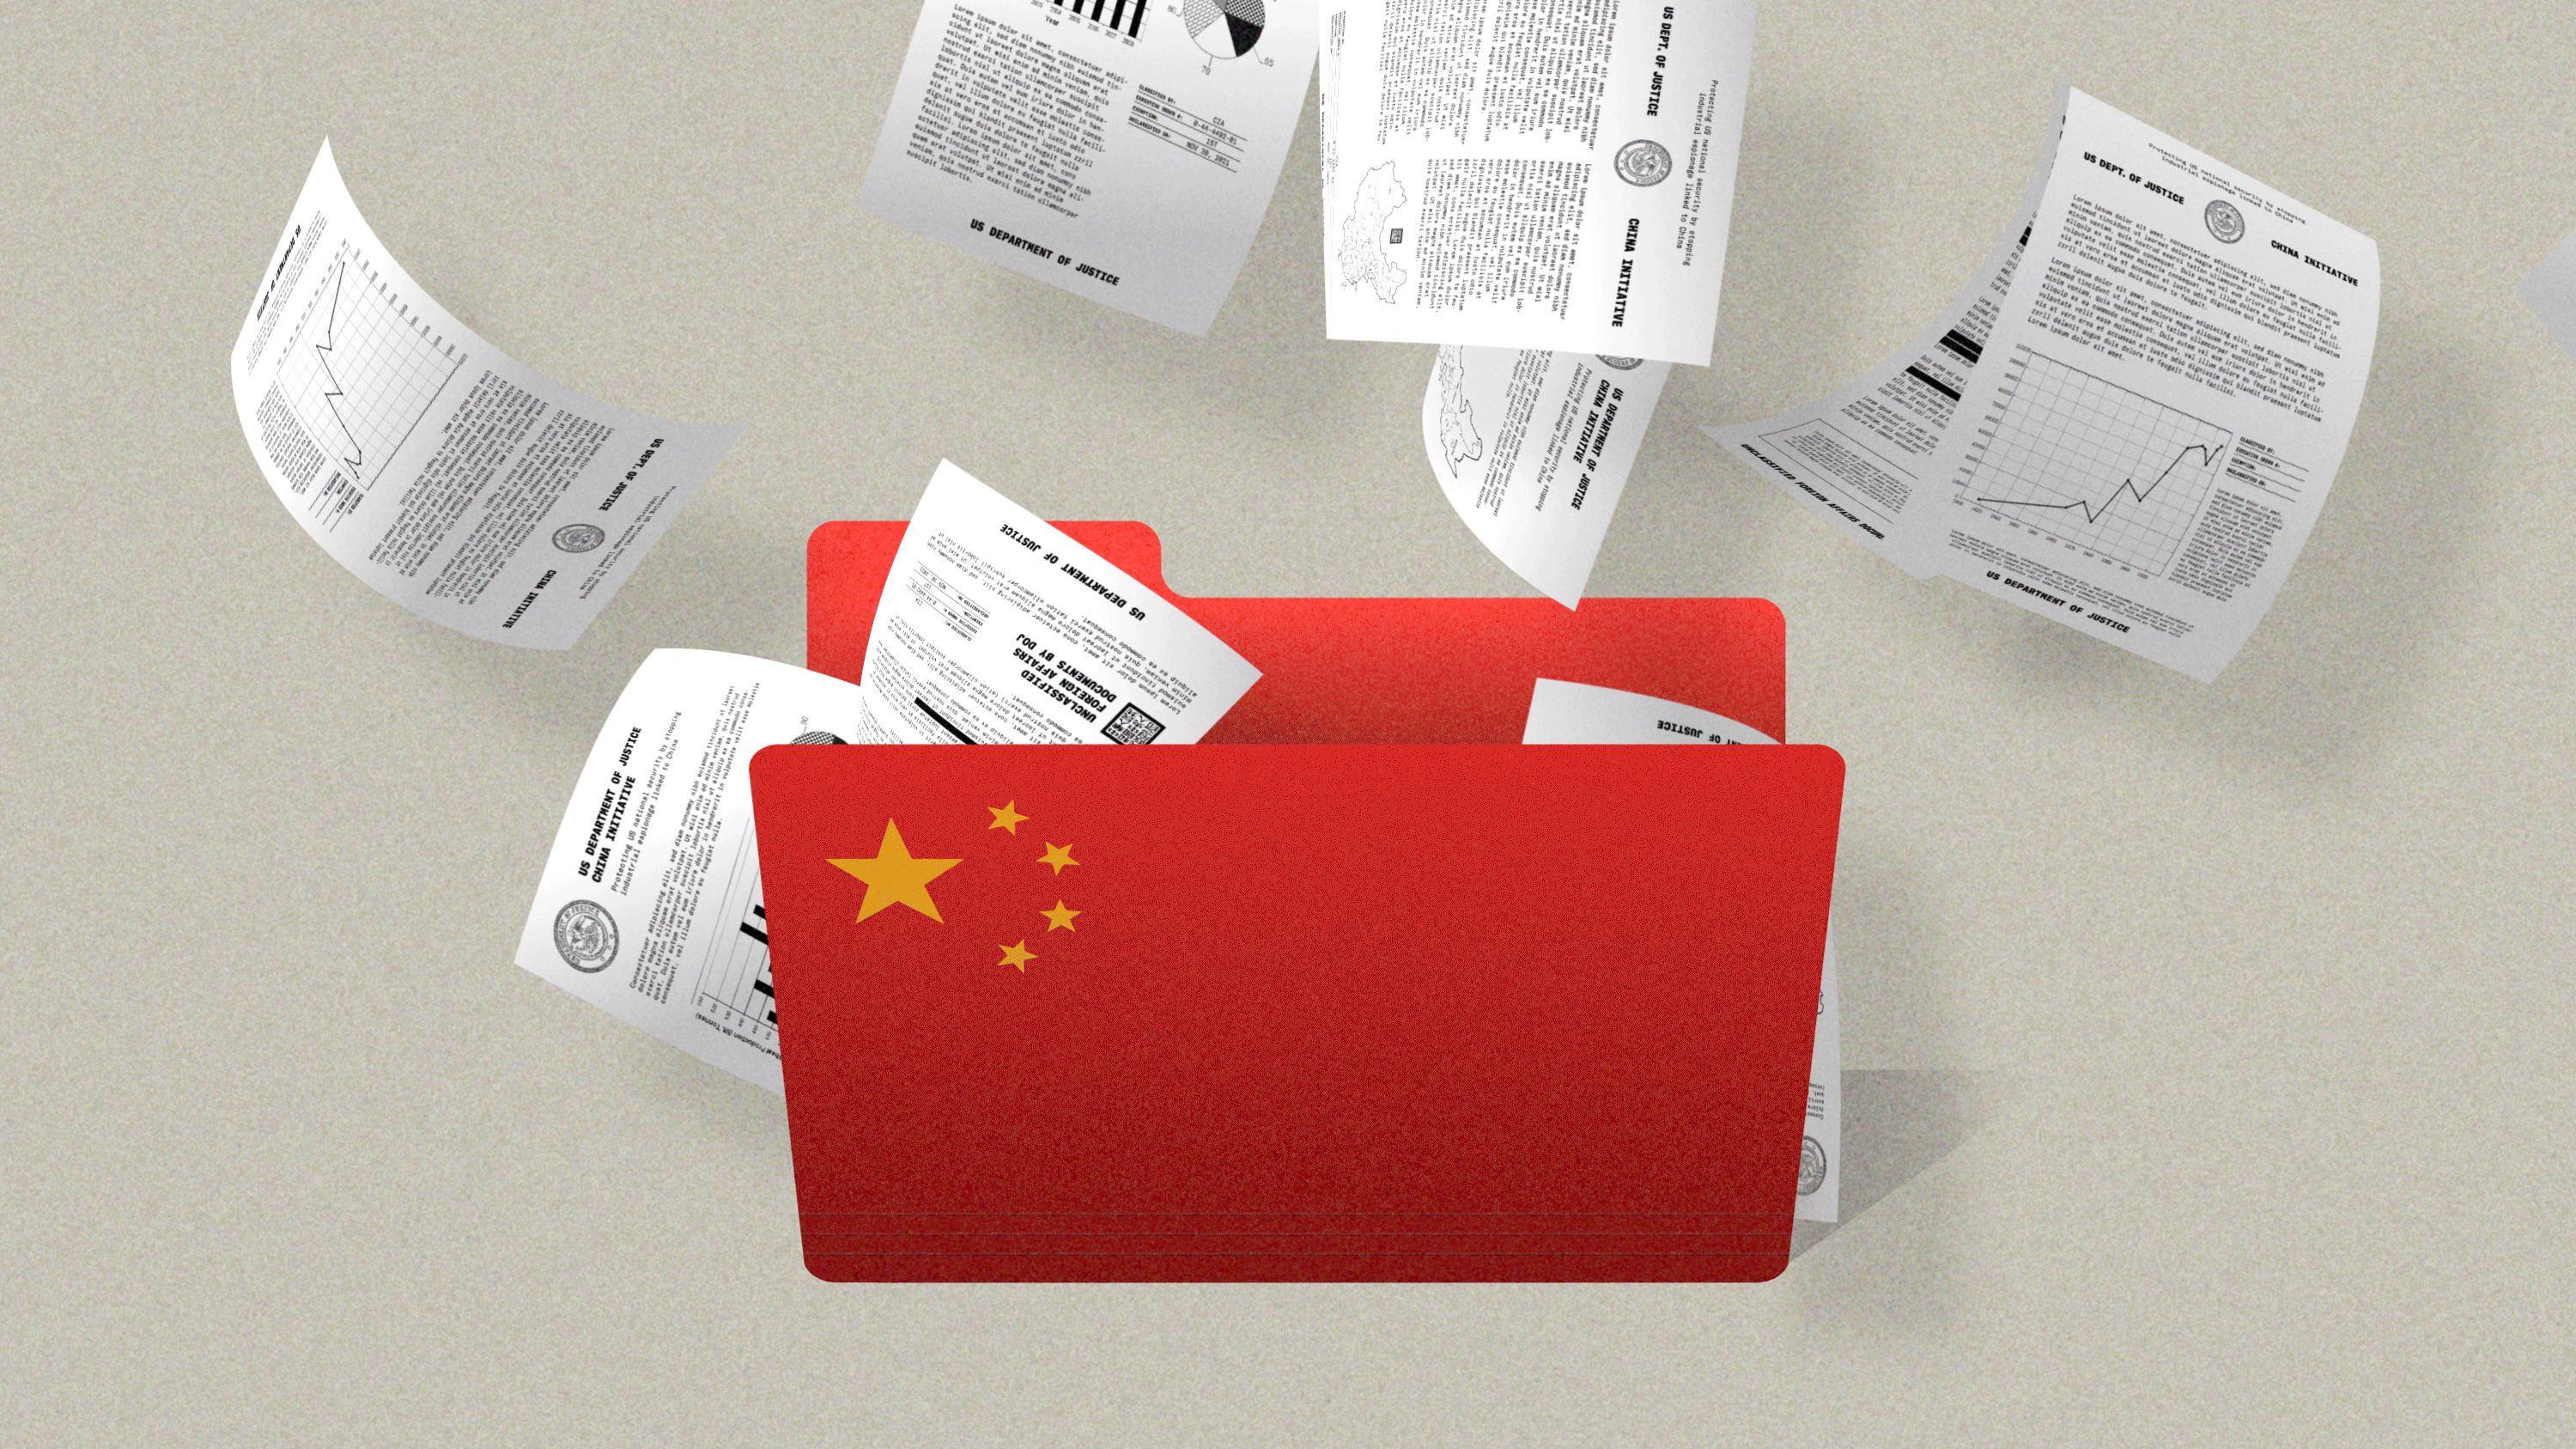 The US government is ending the China Initiative. Now what? | MIT Technology Review